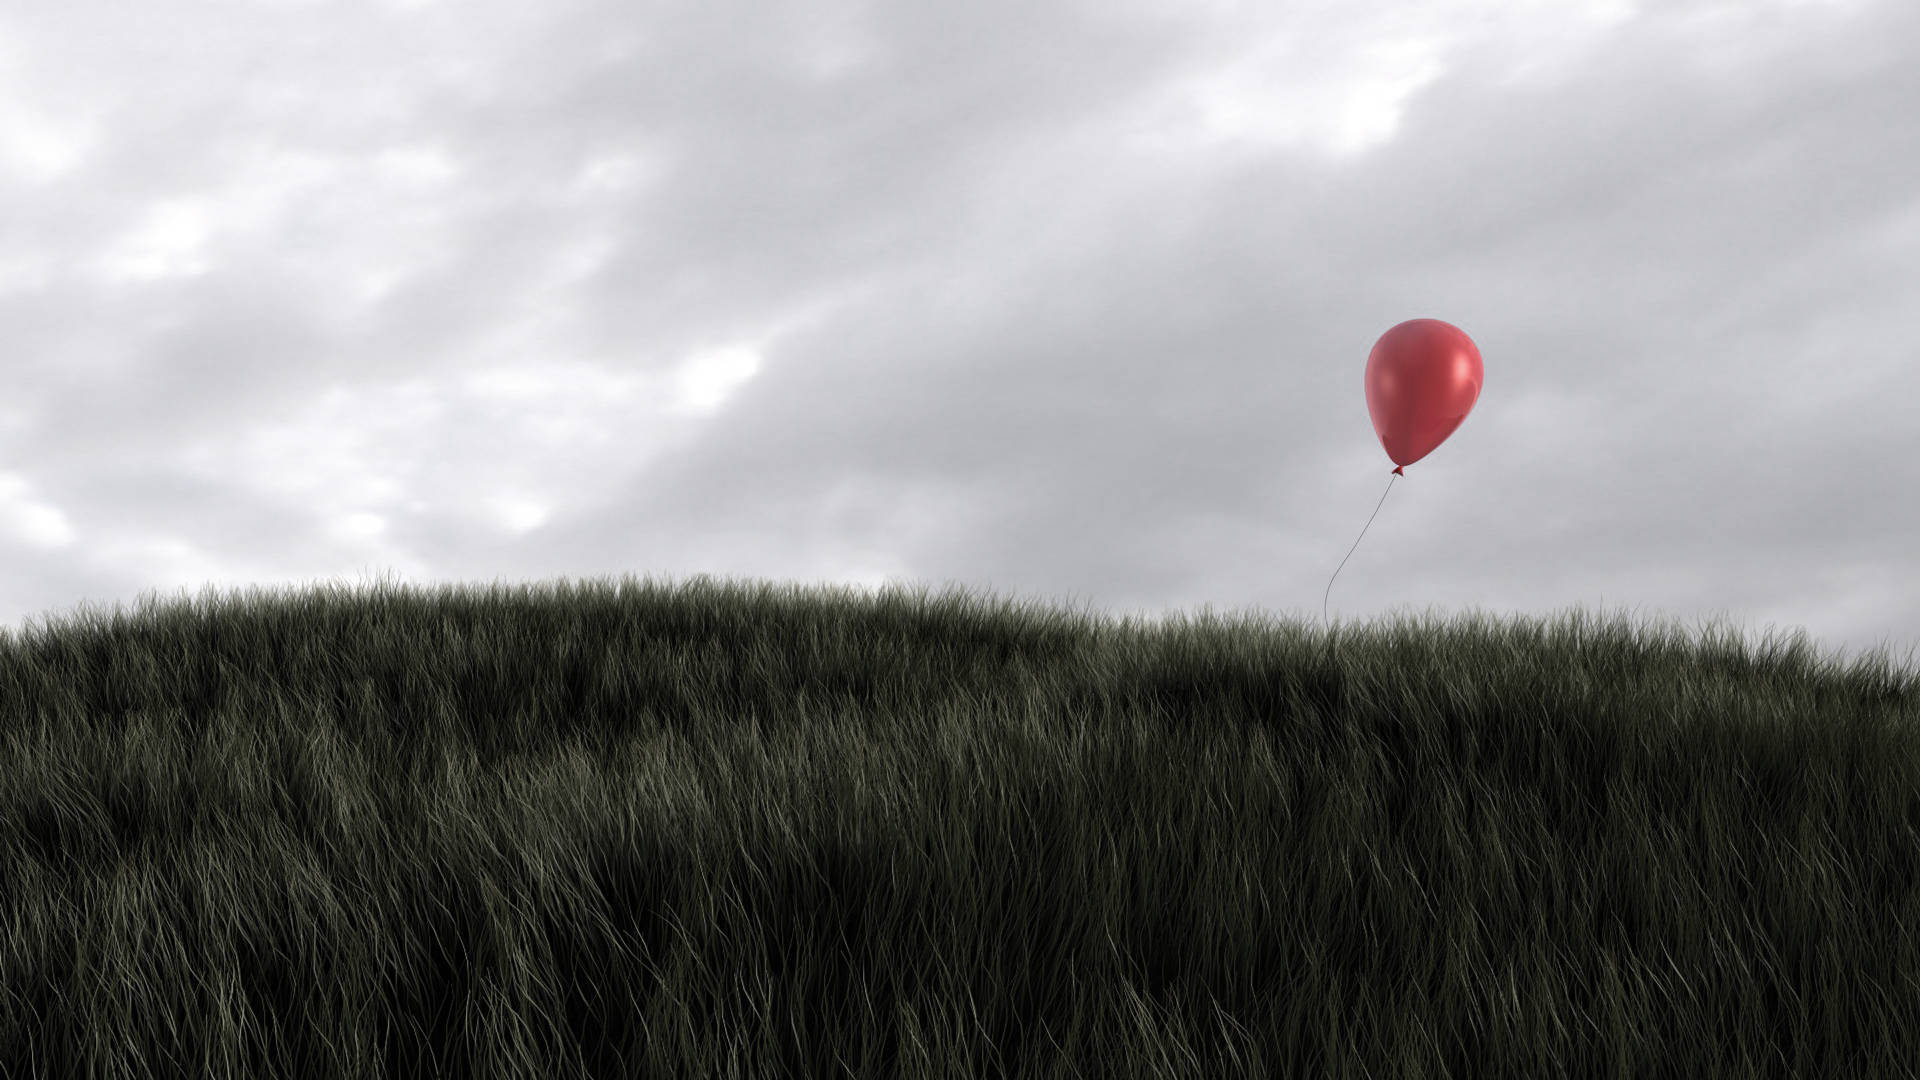 1920X1080 Balloon Wallpaper and Background